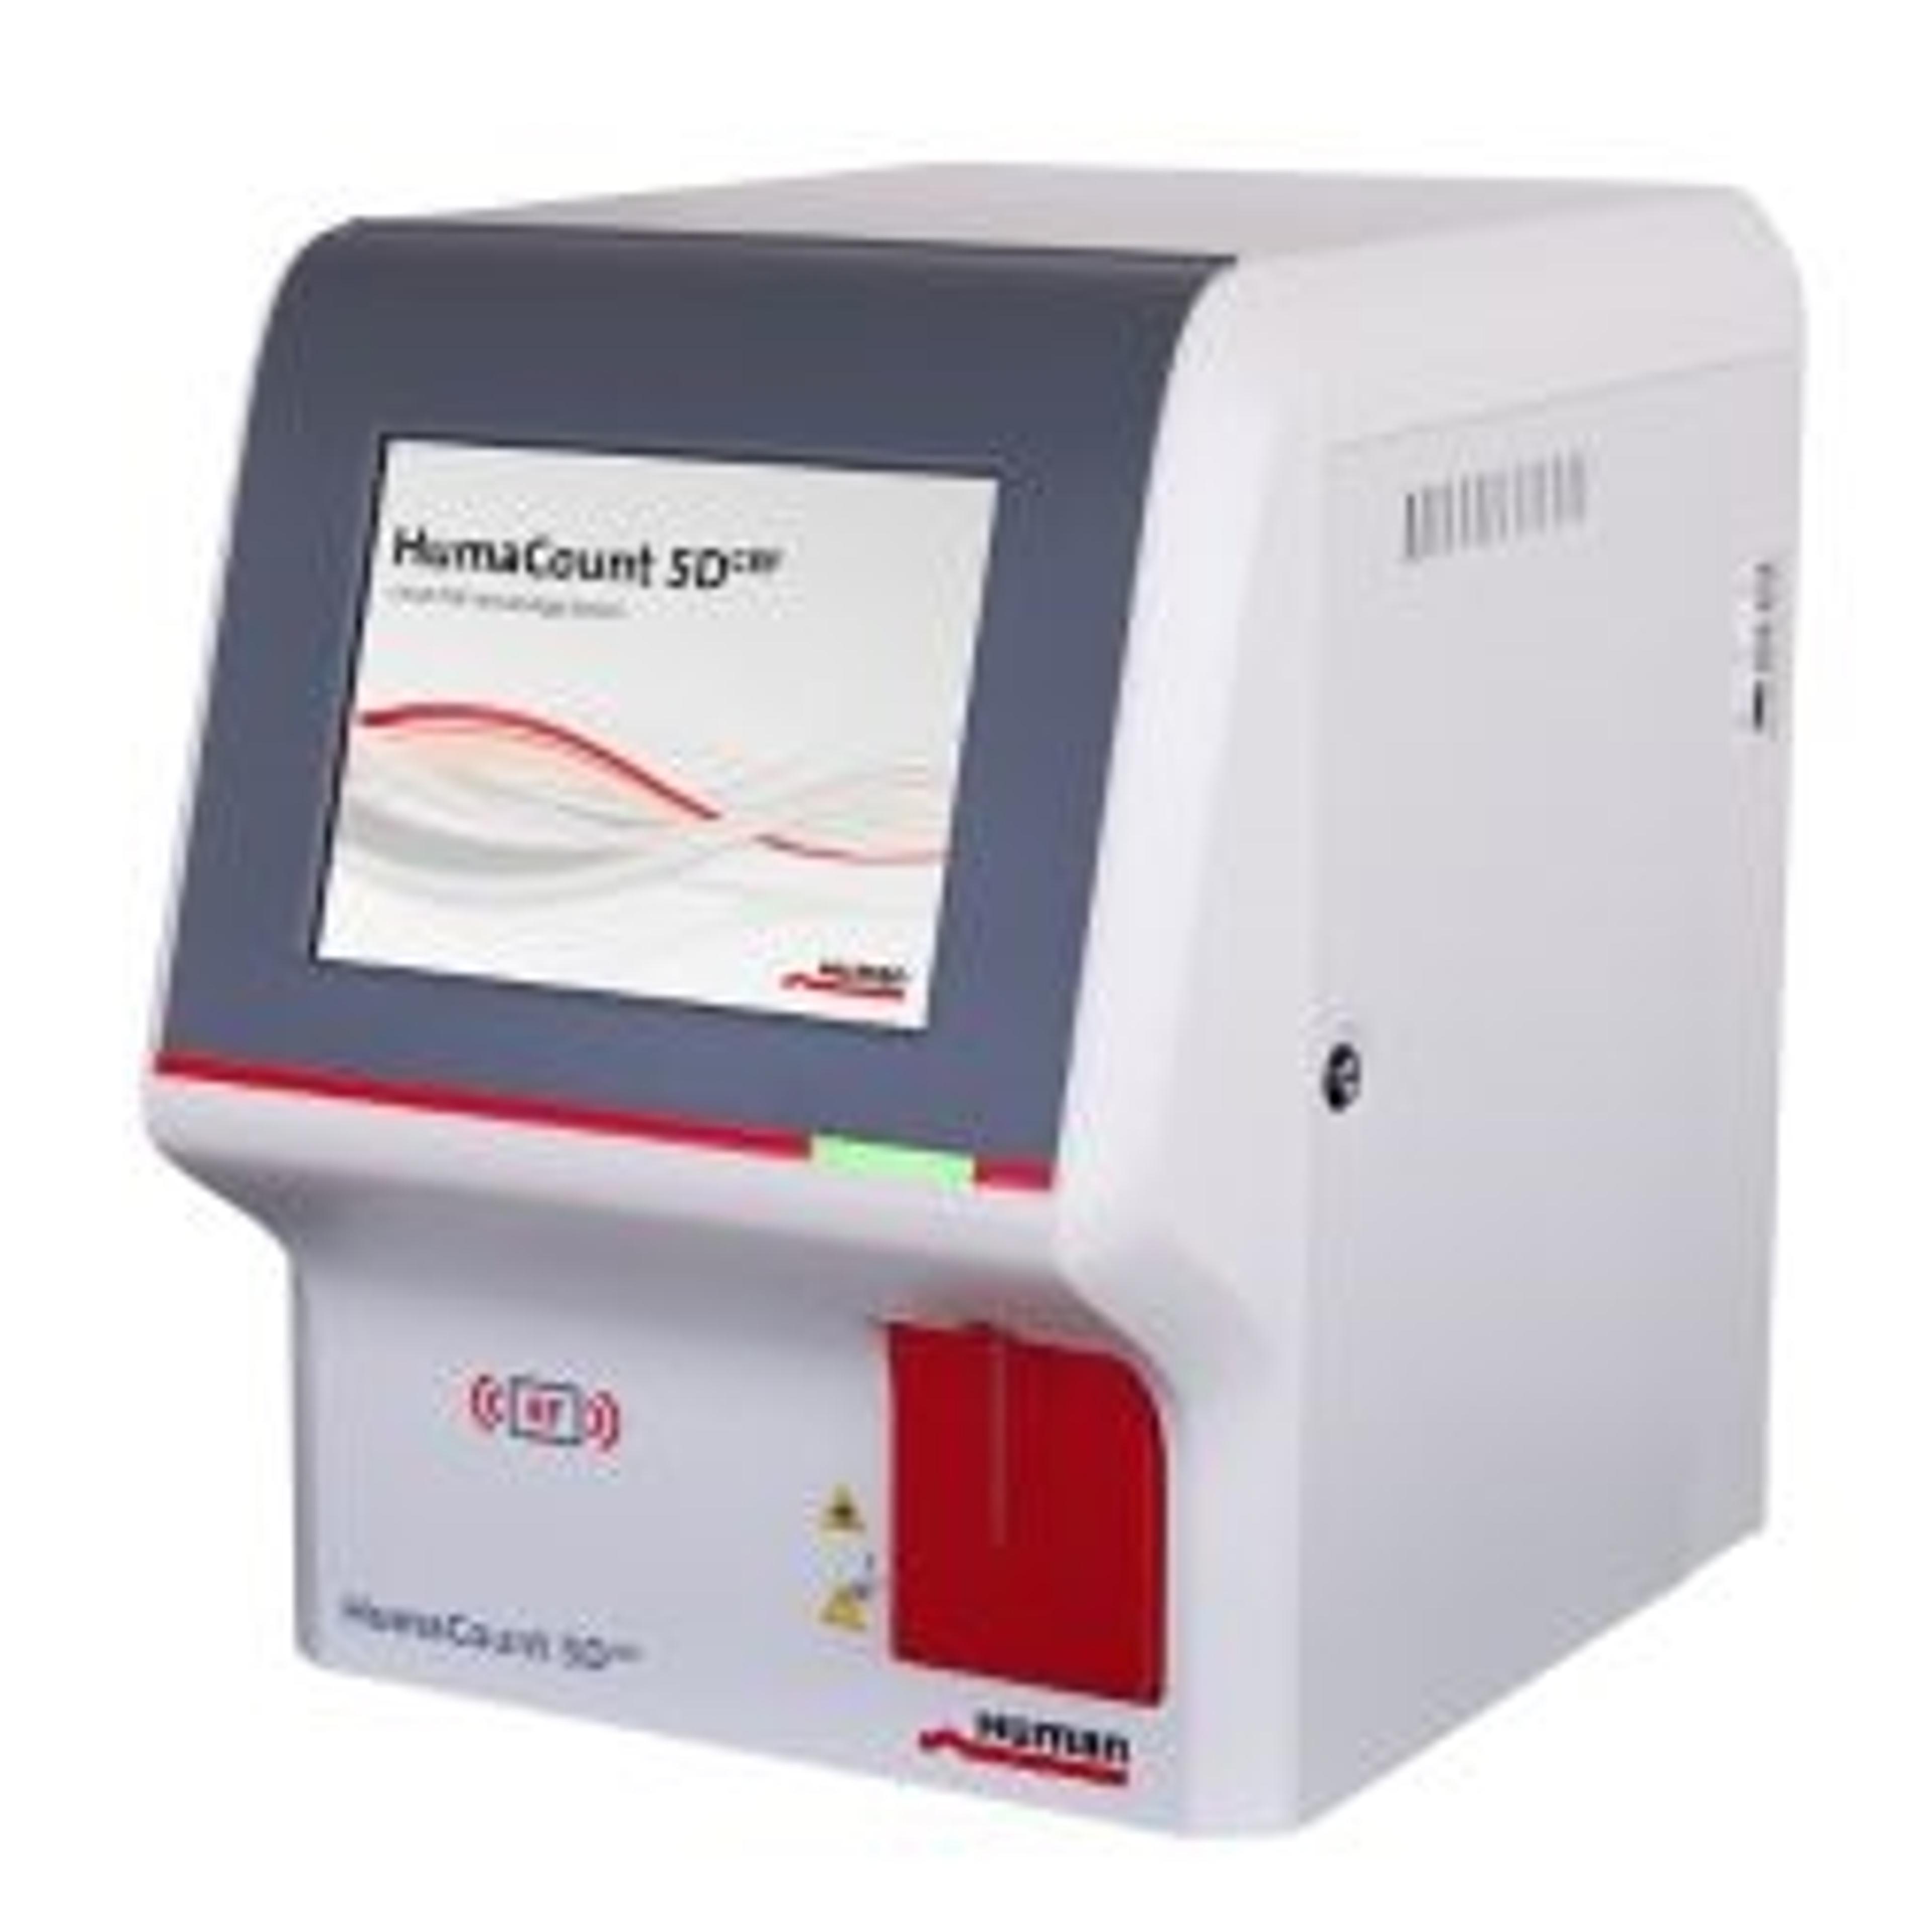 Full blood count system analyzer